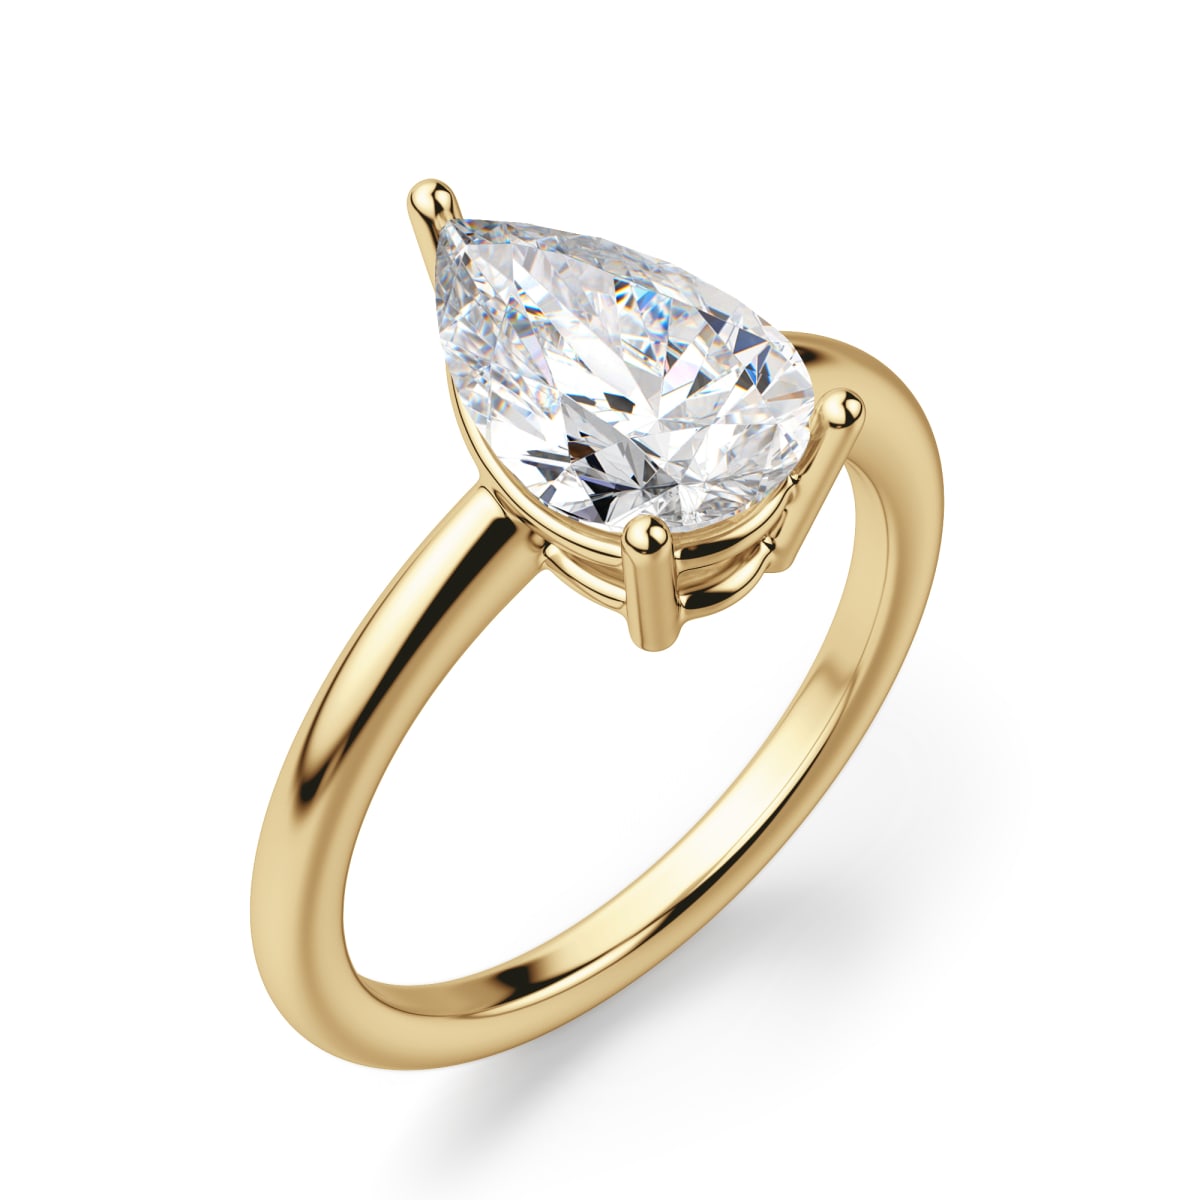 Basket Set Classic Engagement Ring With 1.75 ct Pear Center DEW, Ring Size 7, 14K Yellow Gold, Moissanite